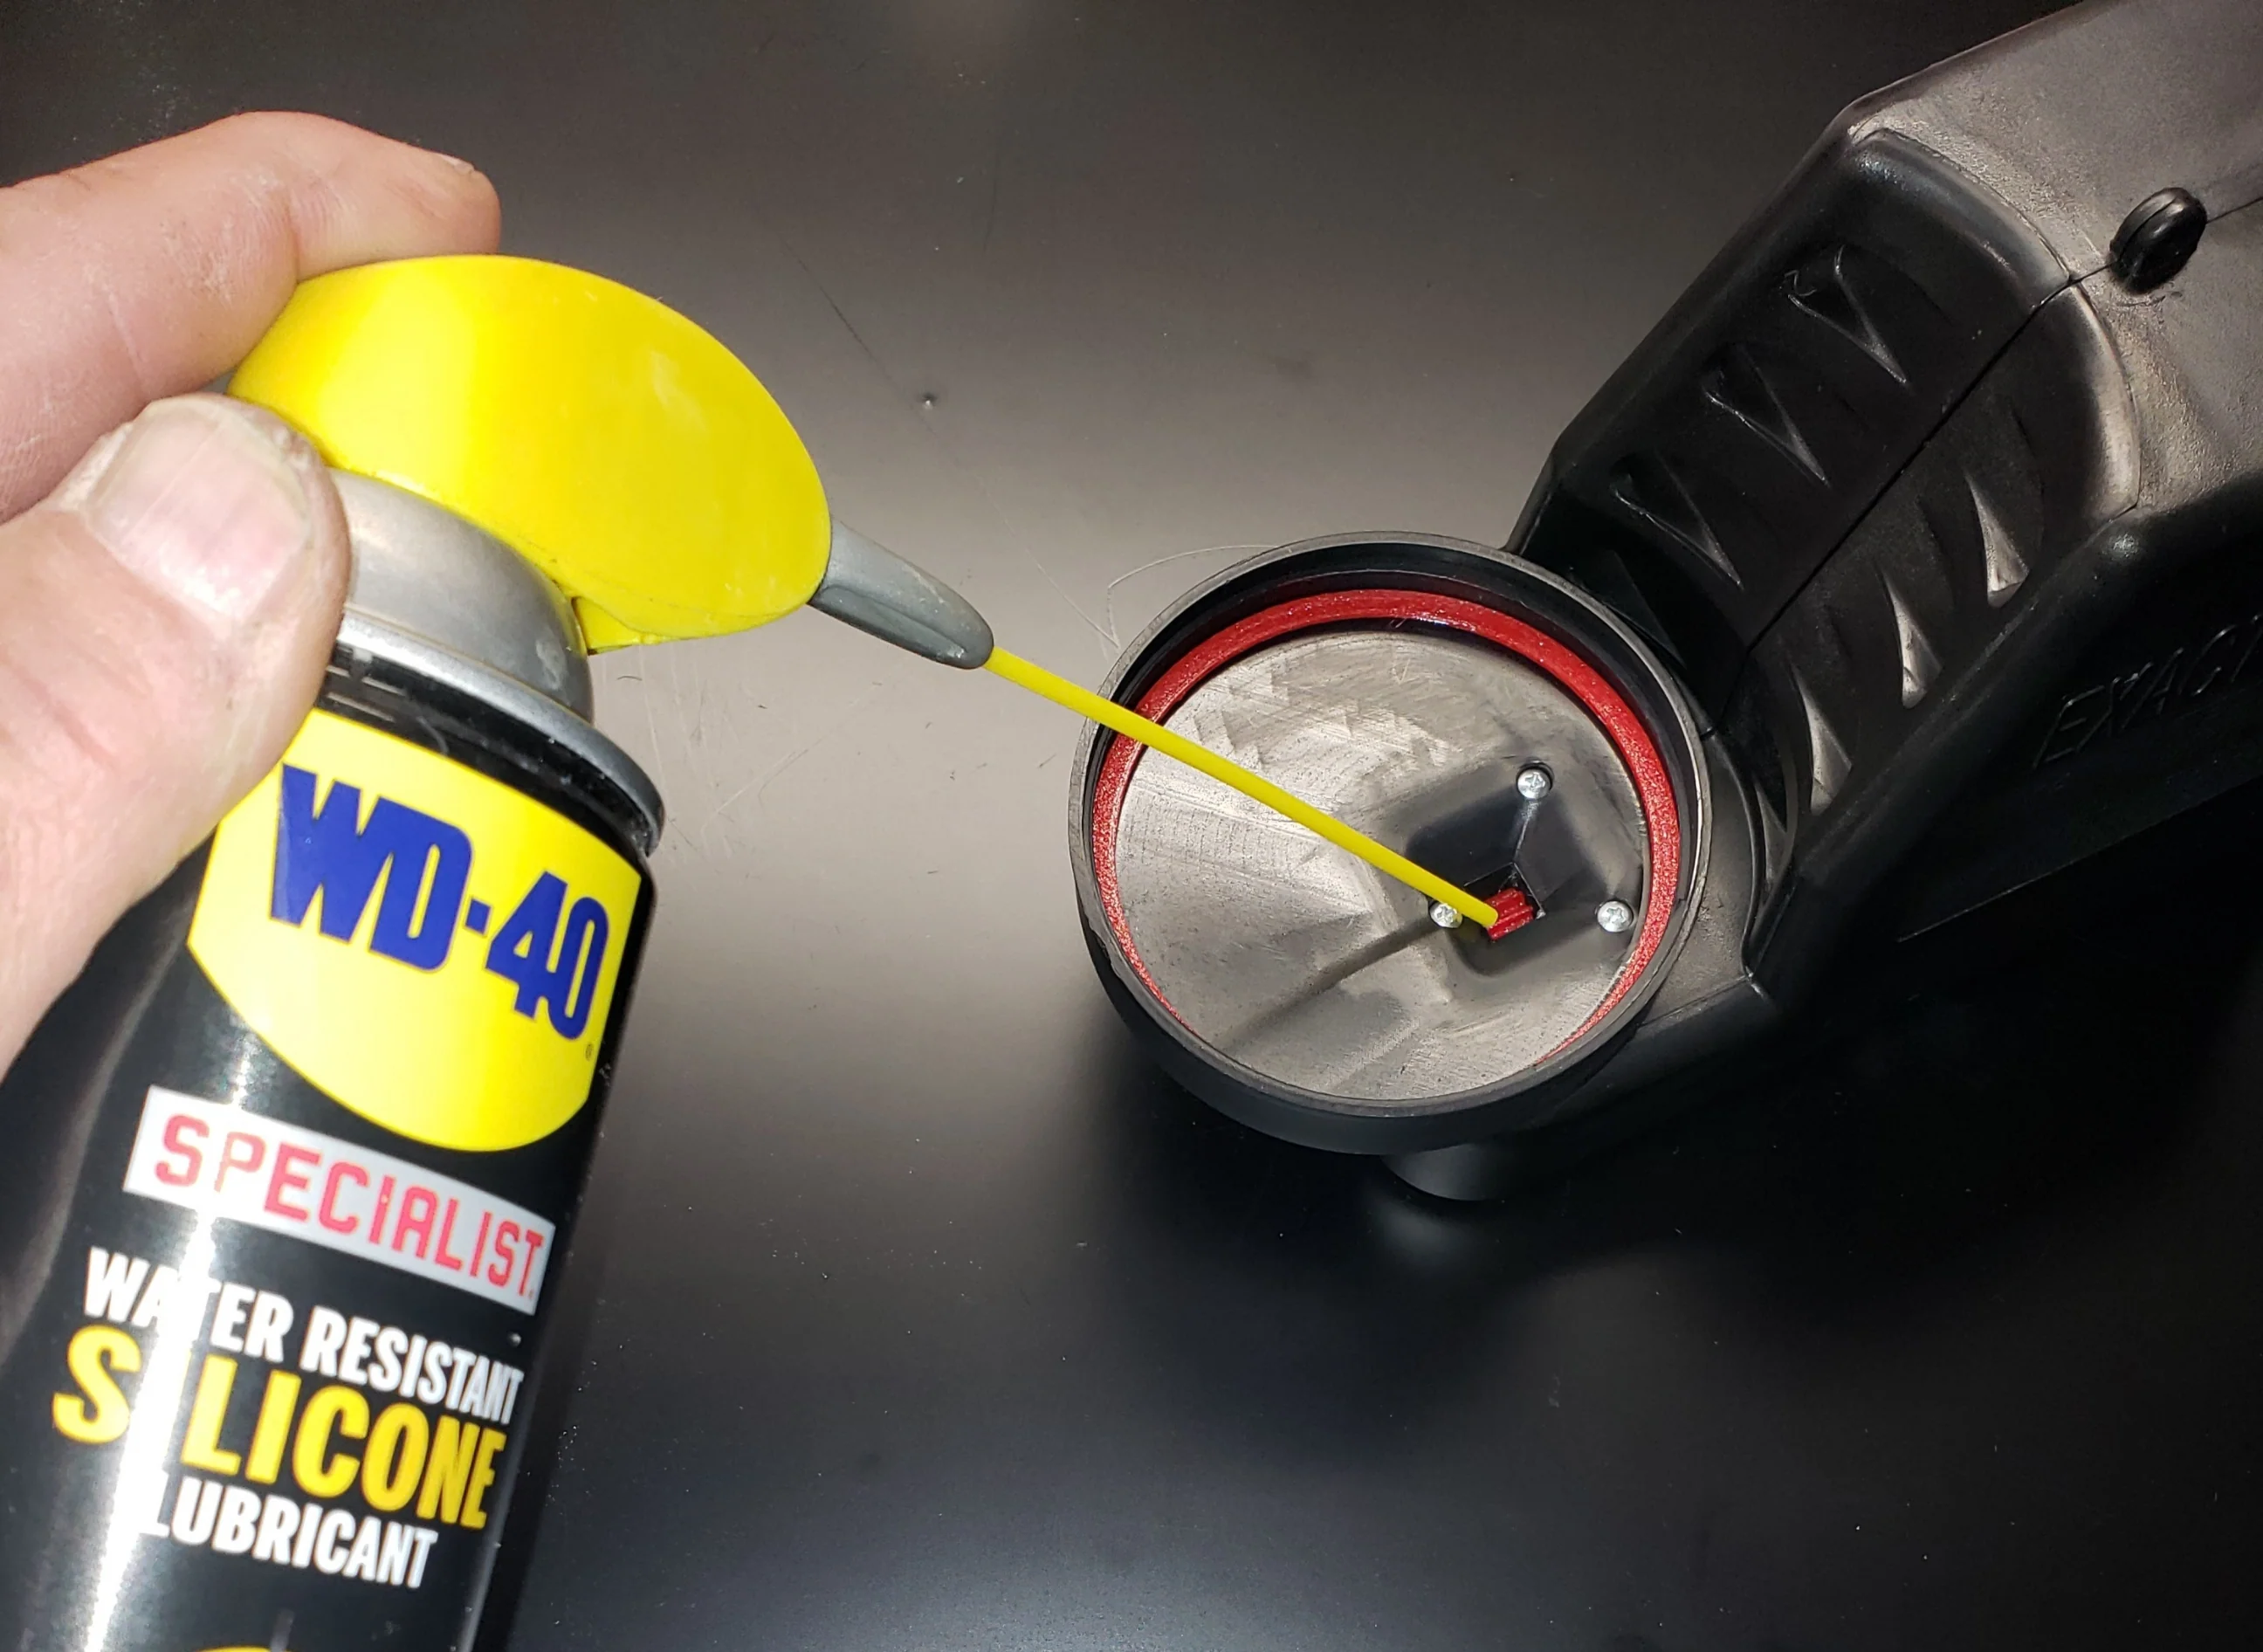 WD40 Silicone Lubricant